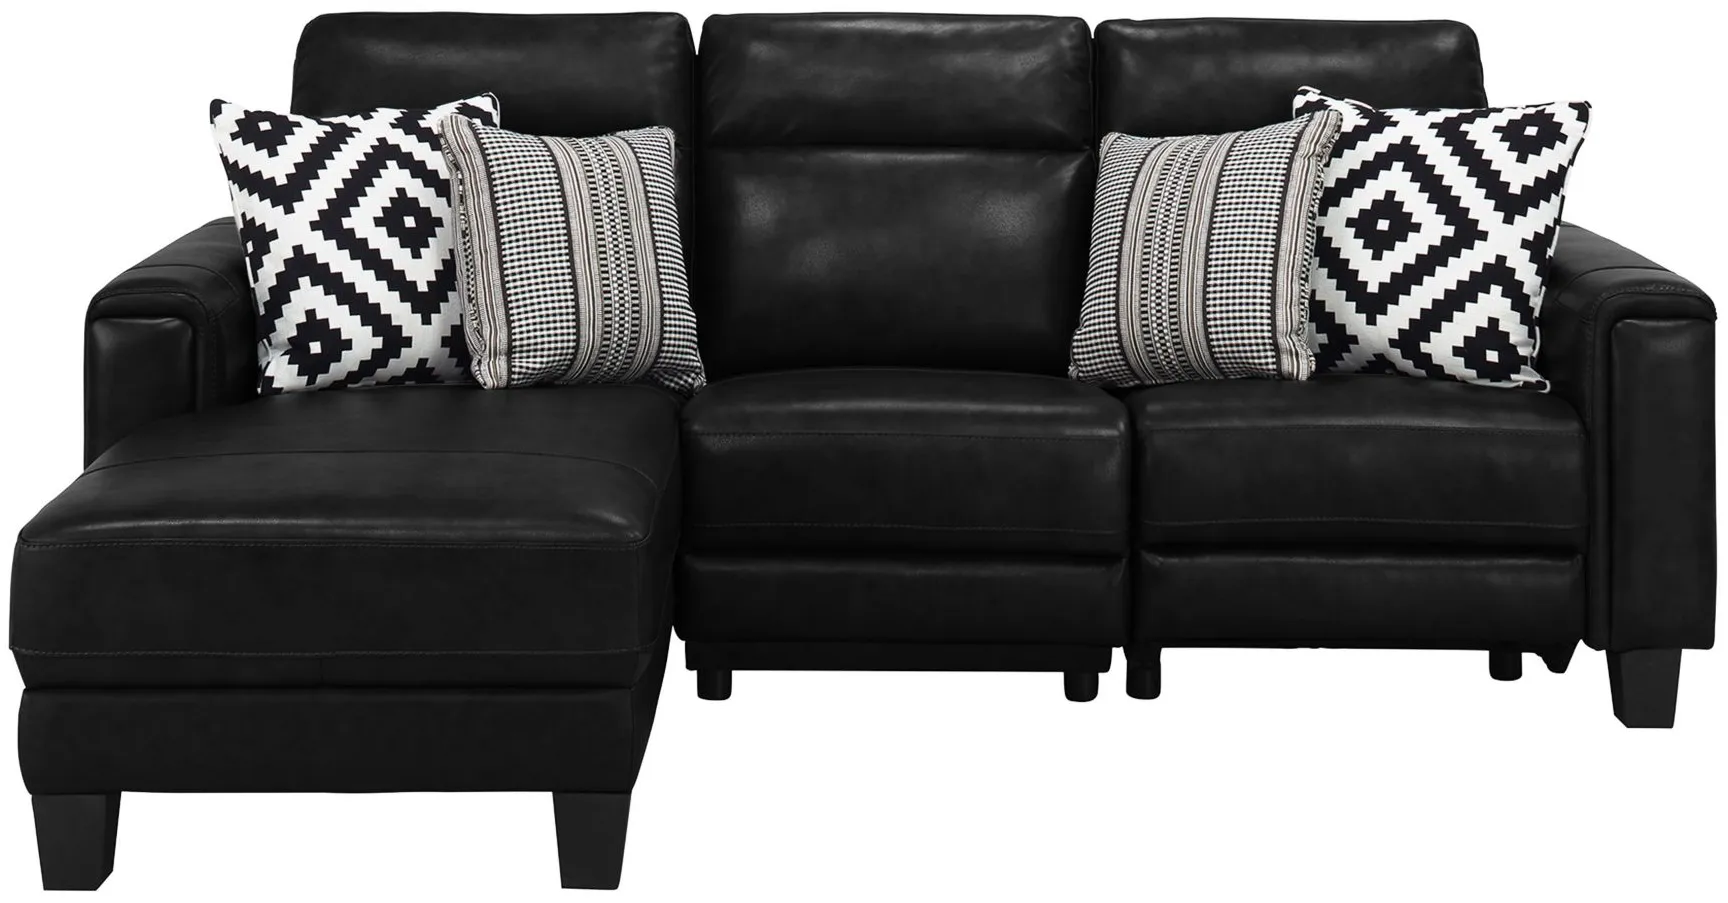 Ace 3-pc. Power Sectional in Black by Bellanest